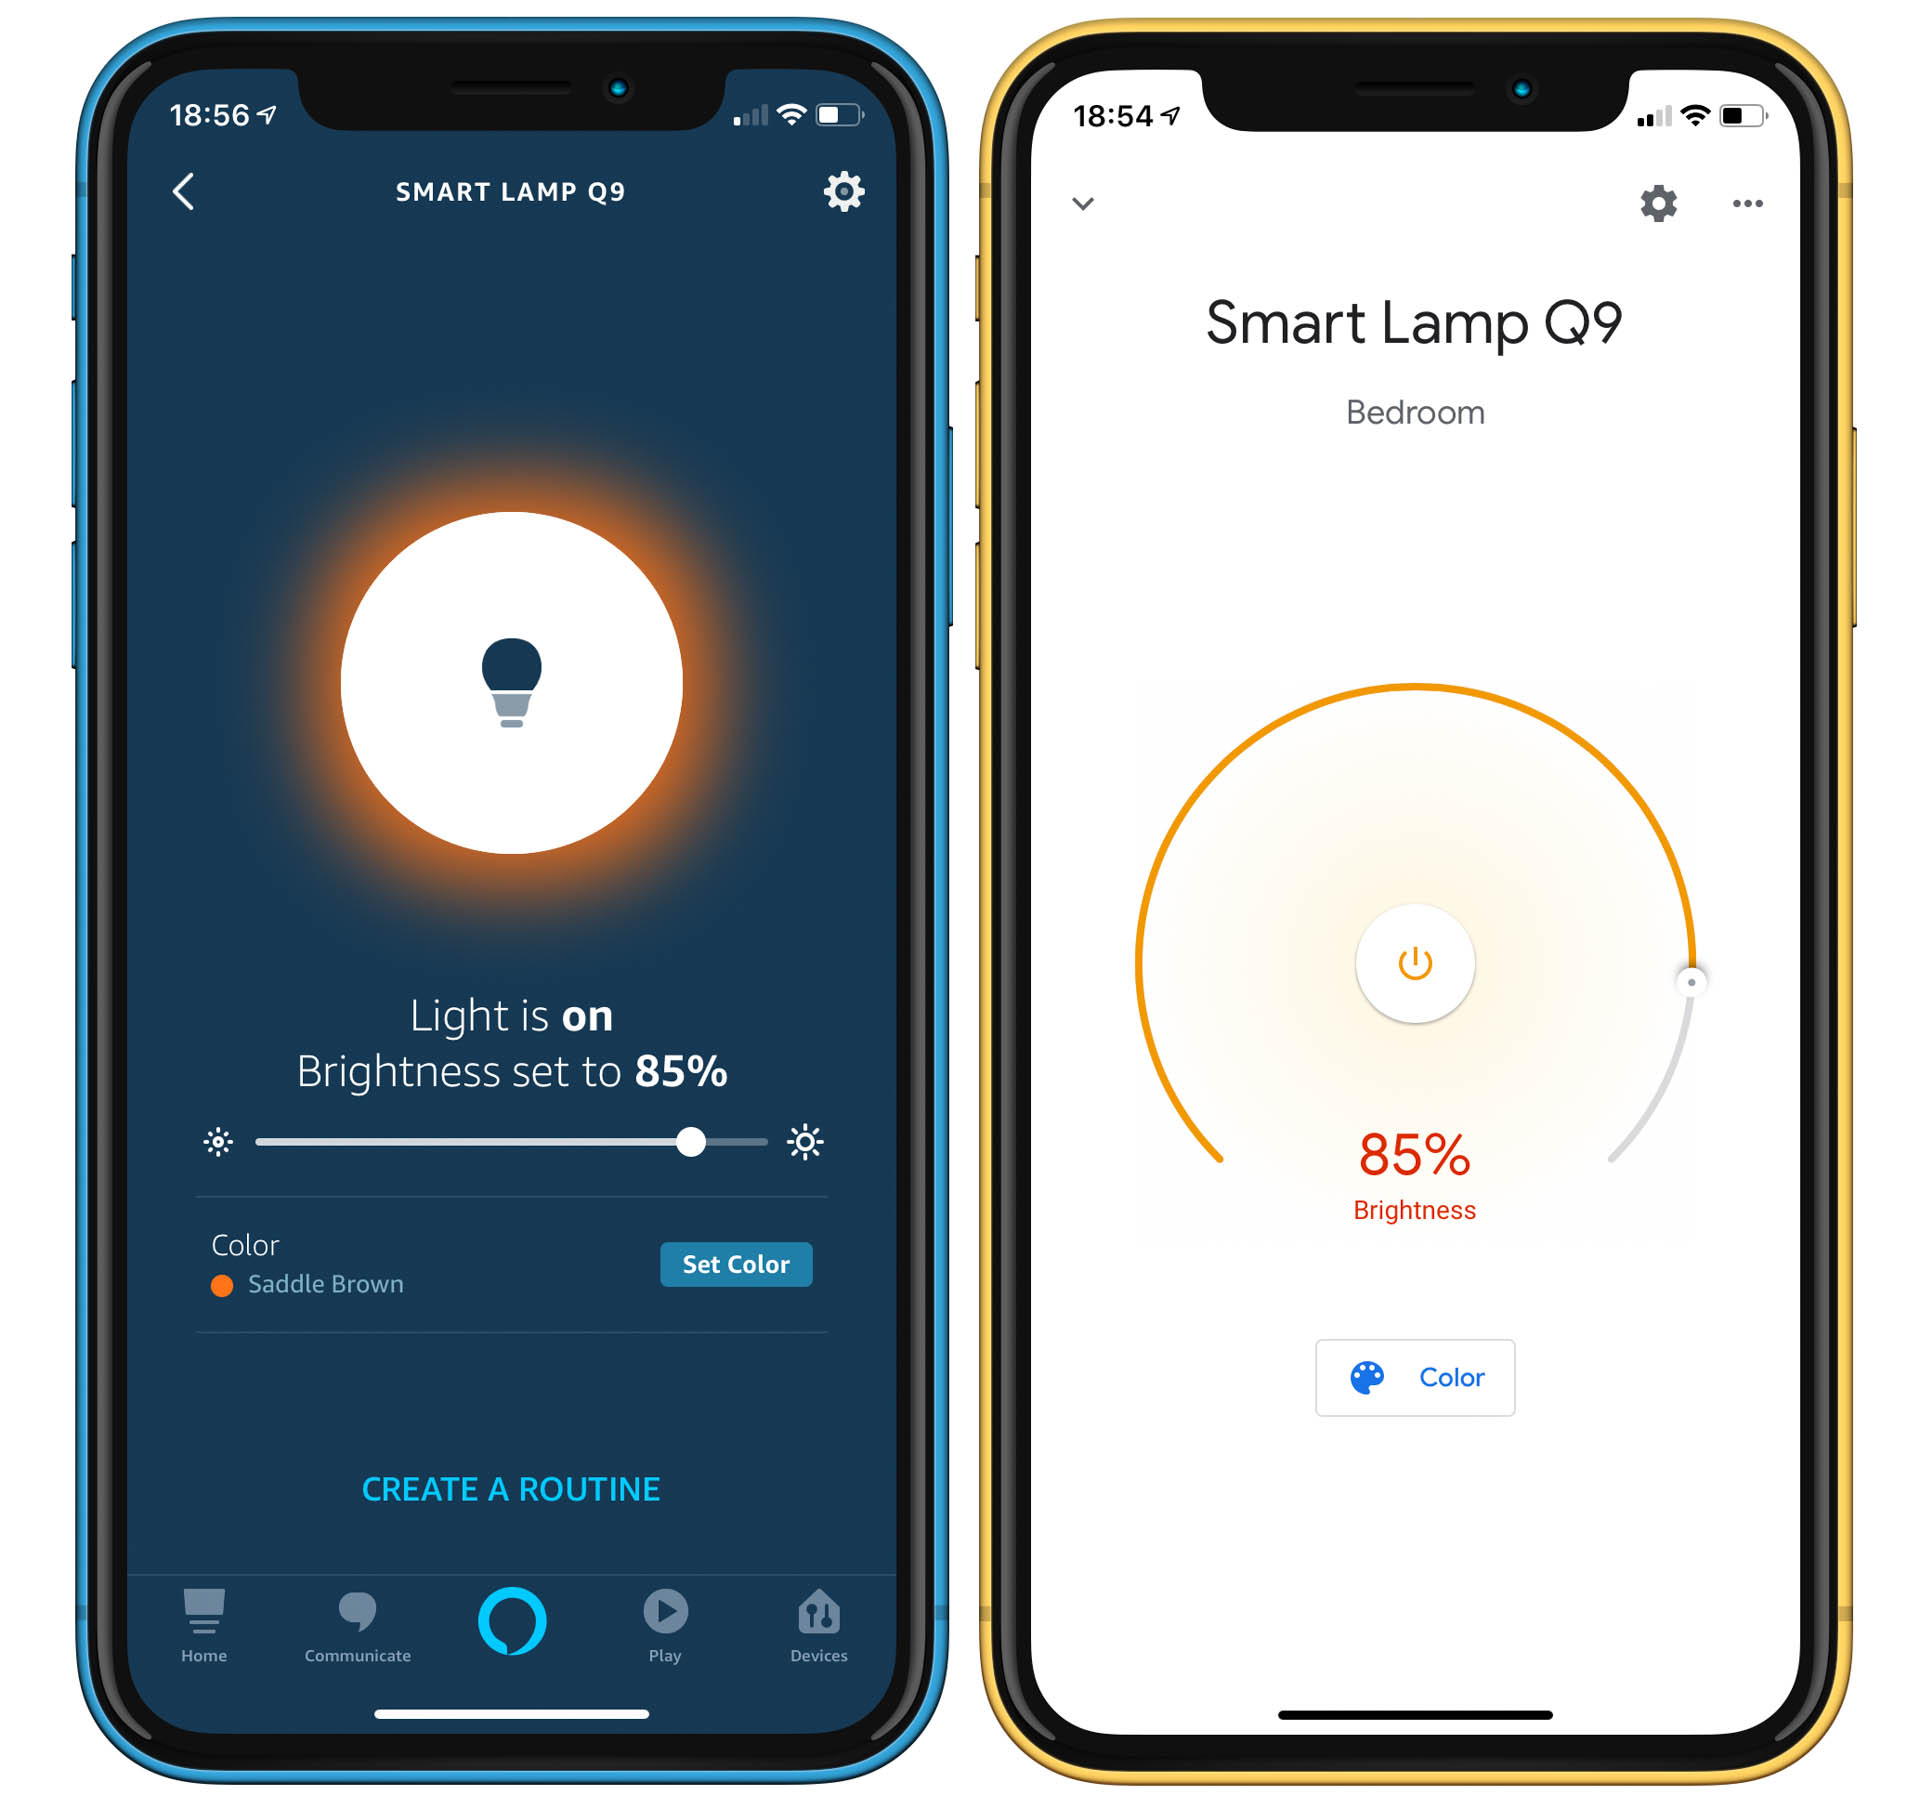 Full integration with the Amazon Alexa (left) and Google Assistant (right) apps and voice controls are yours when you add the Aoyococr lamps to these ecosystems. Image: Digitized House.